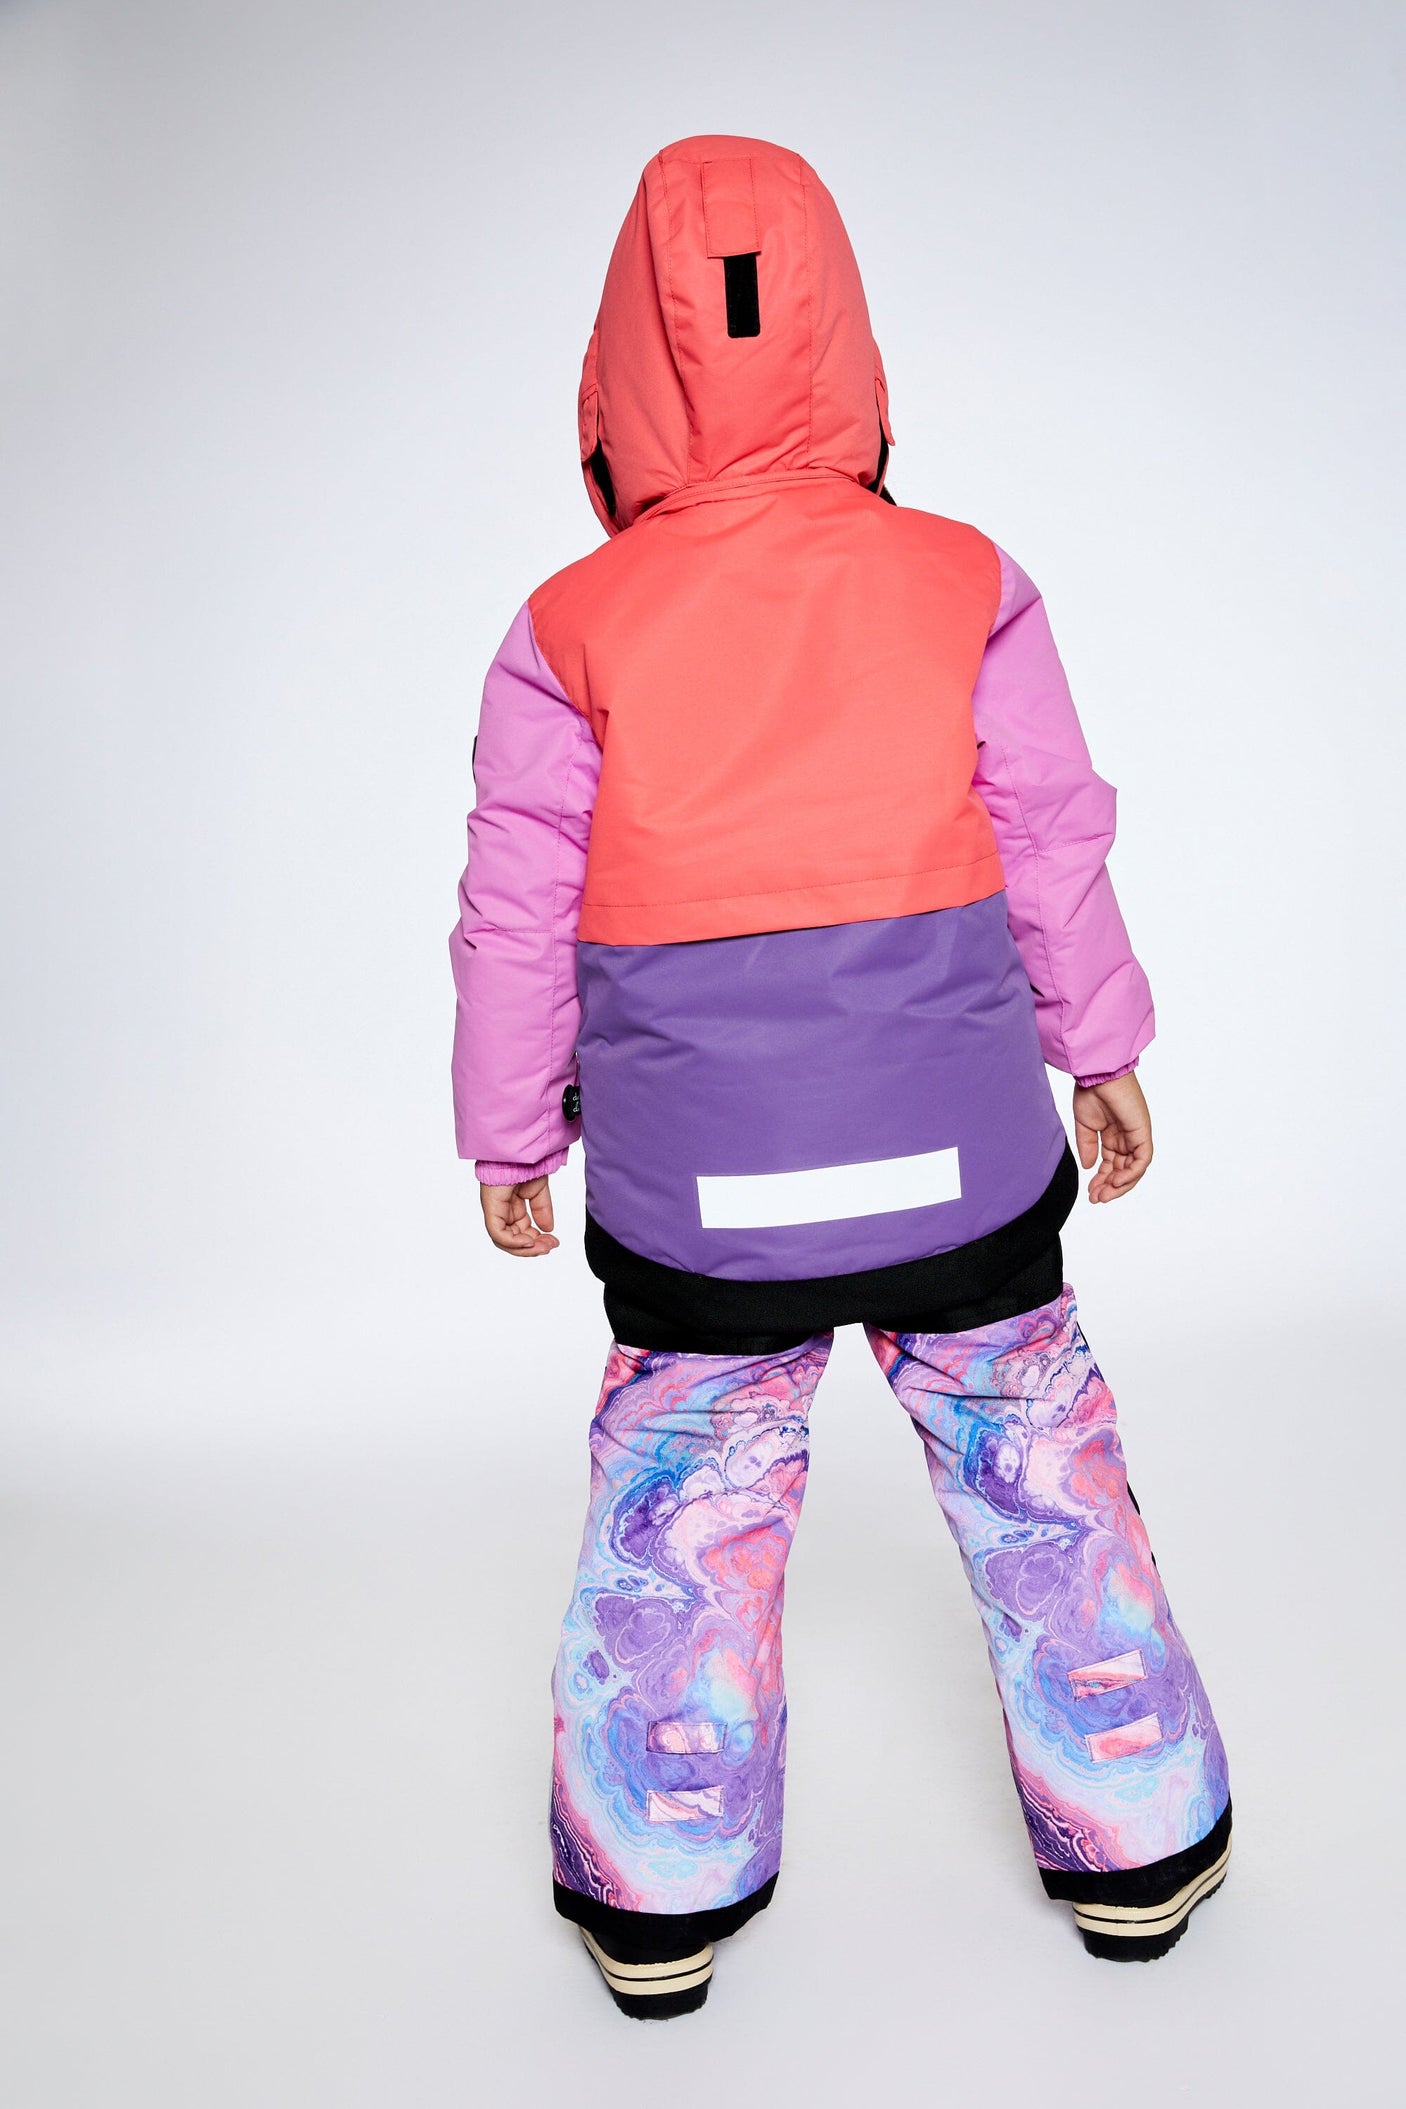 Two Piece Snowsuit Pink Lilac With Geode Print-2